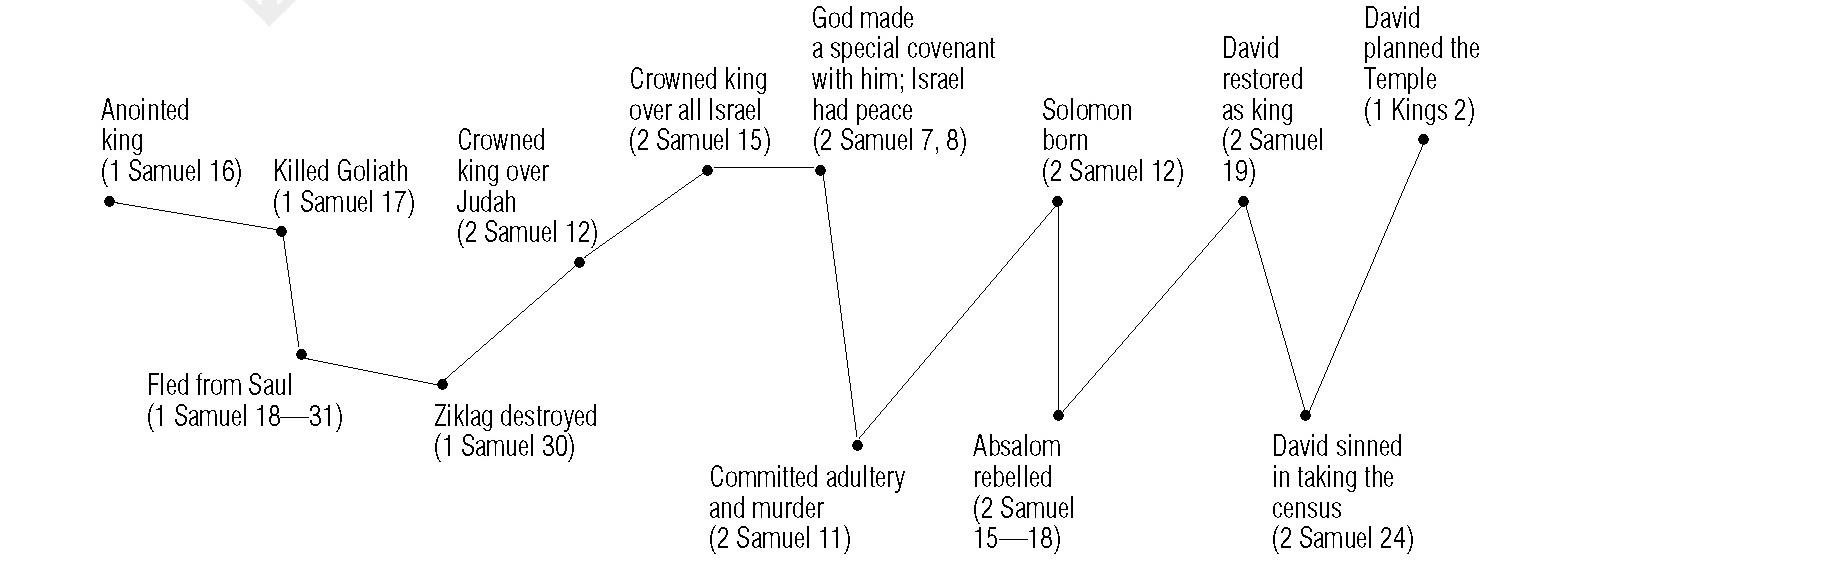 1 Kings 2:39 After three years, however, two of Shimei's slaves